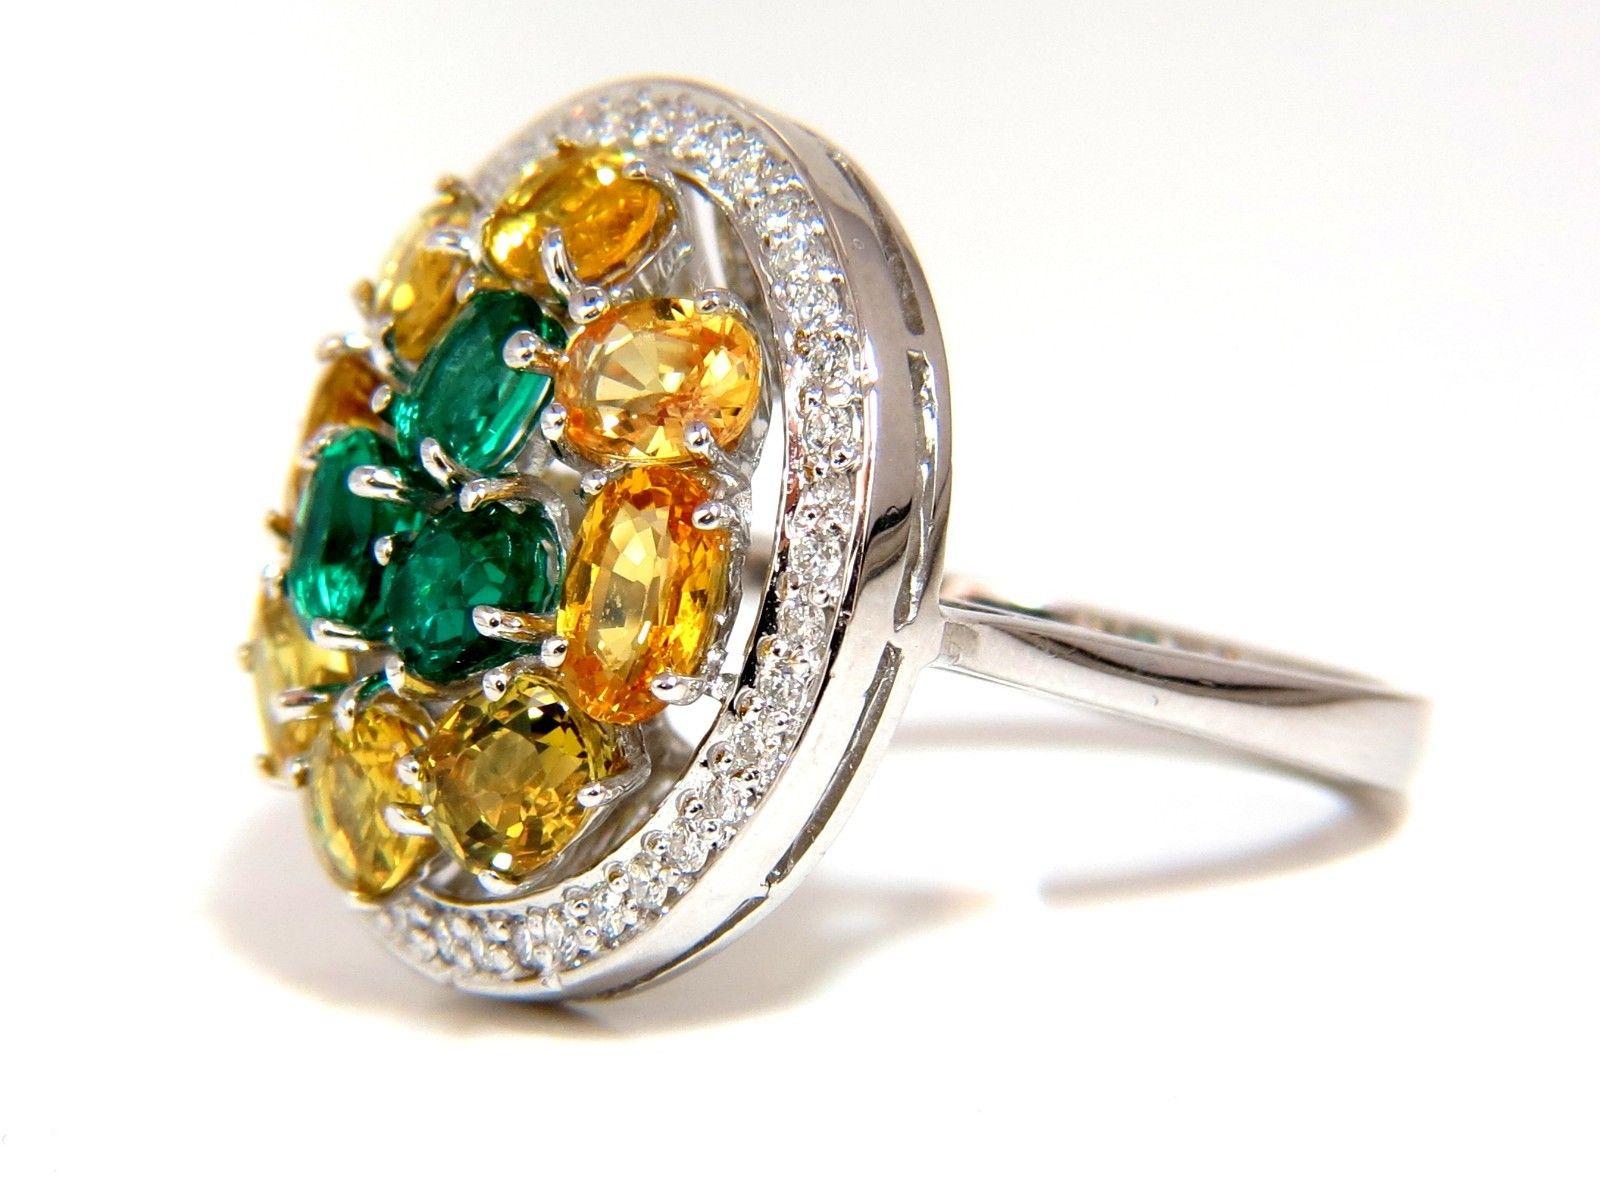 Natural Yellow Sapphires & emeralds diamonds cluster ring.

Raised dome.

Sapphires & Emeralds: 5.12ct

Full cut brilliant ovals

 supreme Clean clarity 

Transparent and vibrant top Bright gem Fancy yellow colors sapphires & 

Bright green